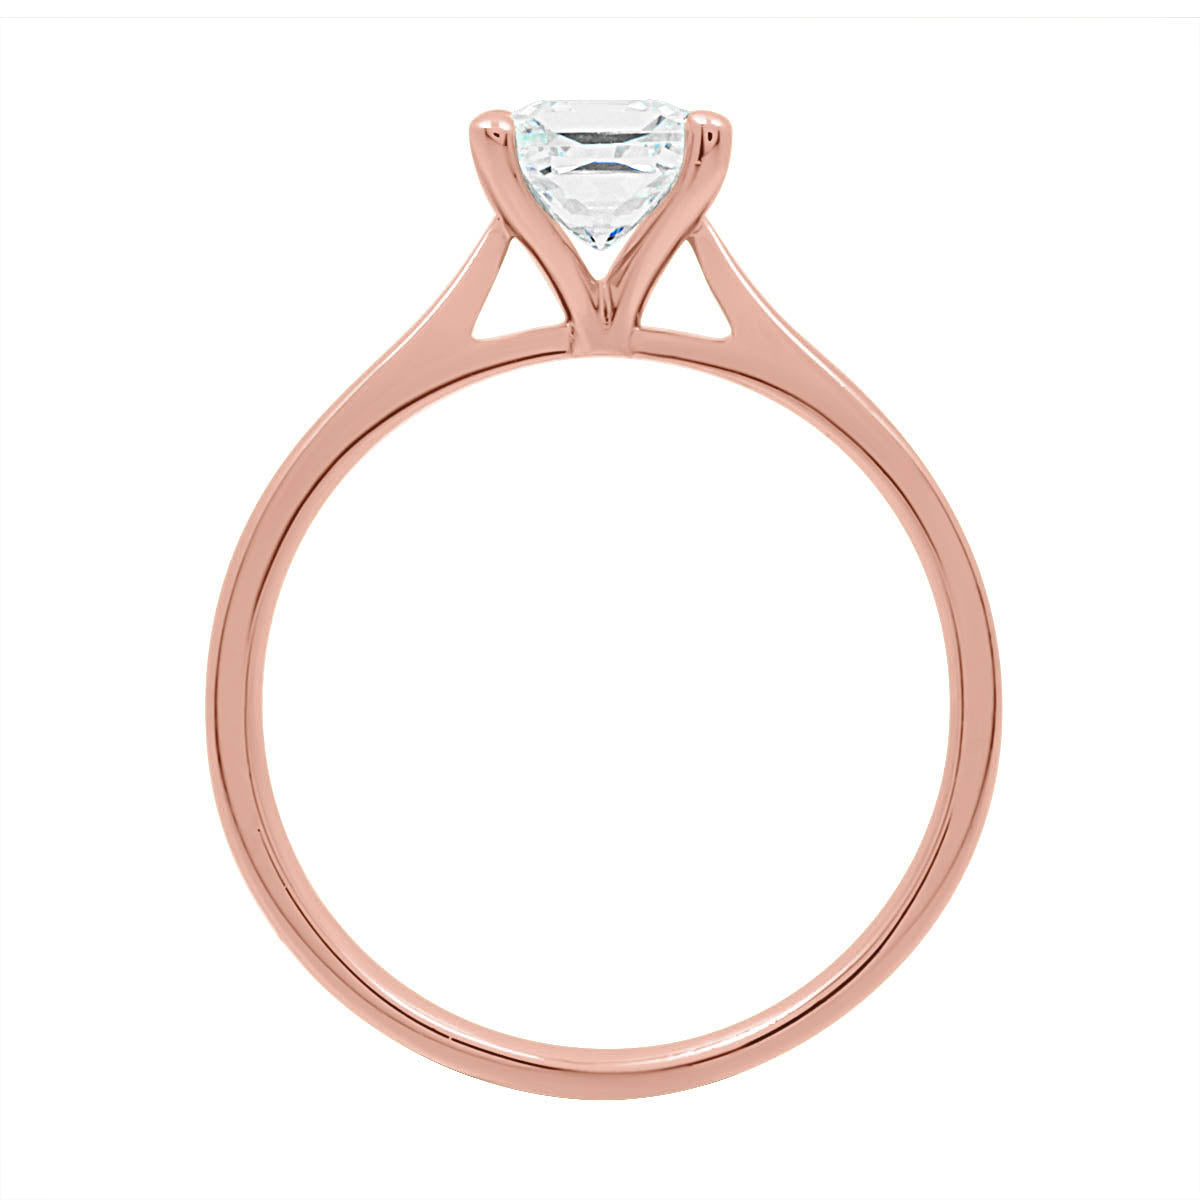 Princess Cut Diamond Ring in rose gold in an upright position